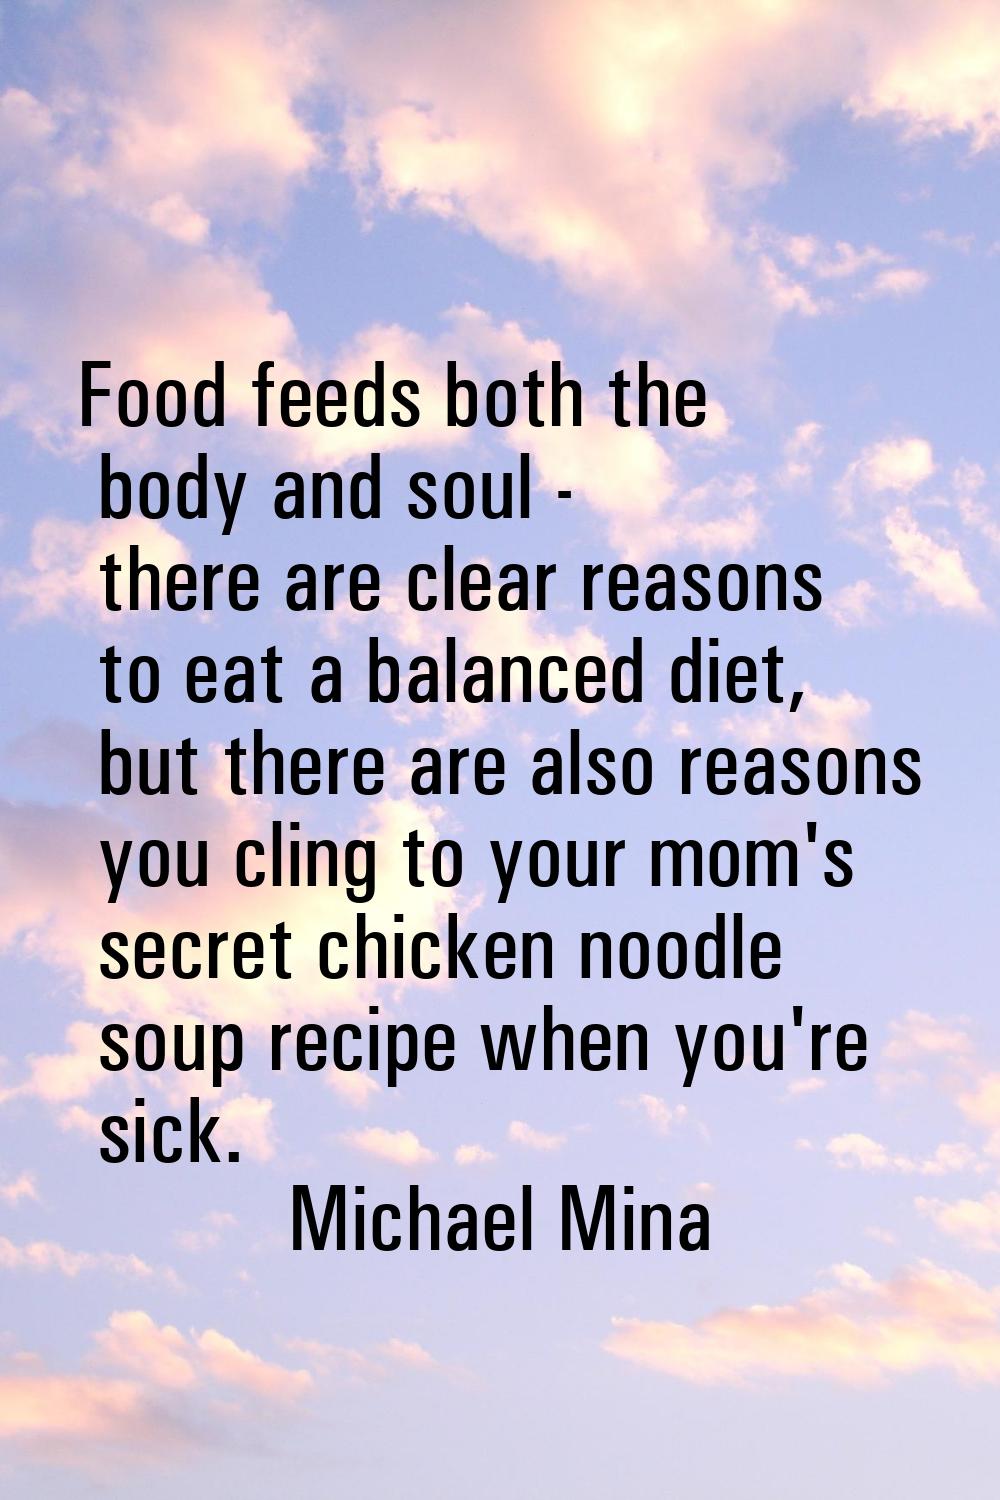 Food feeds both the body and soul - there are clear reasons to eat a balanced diet, but there are a